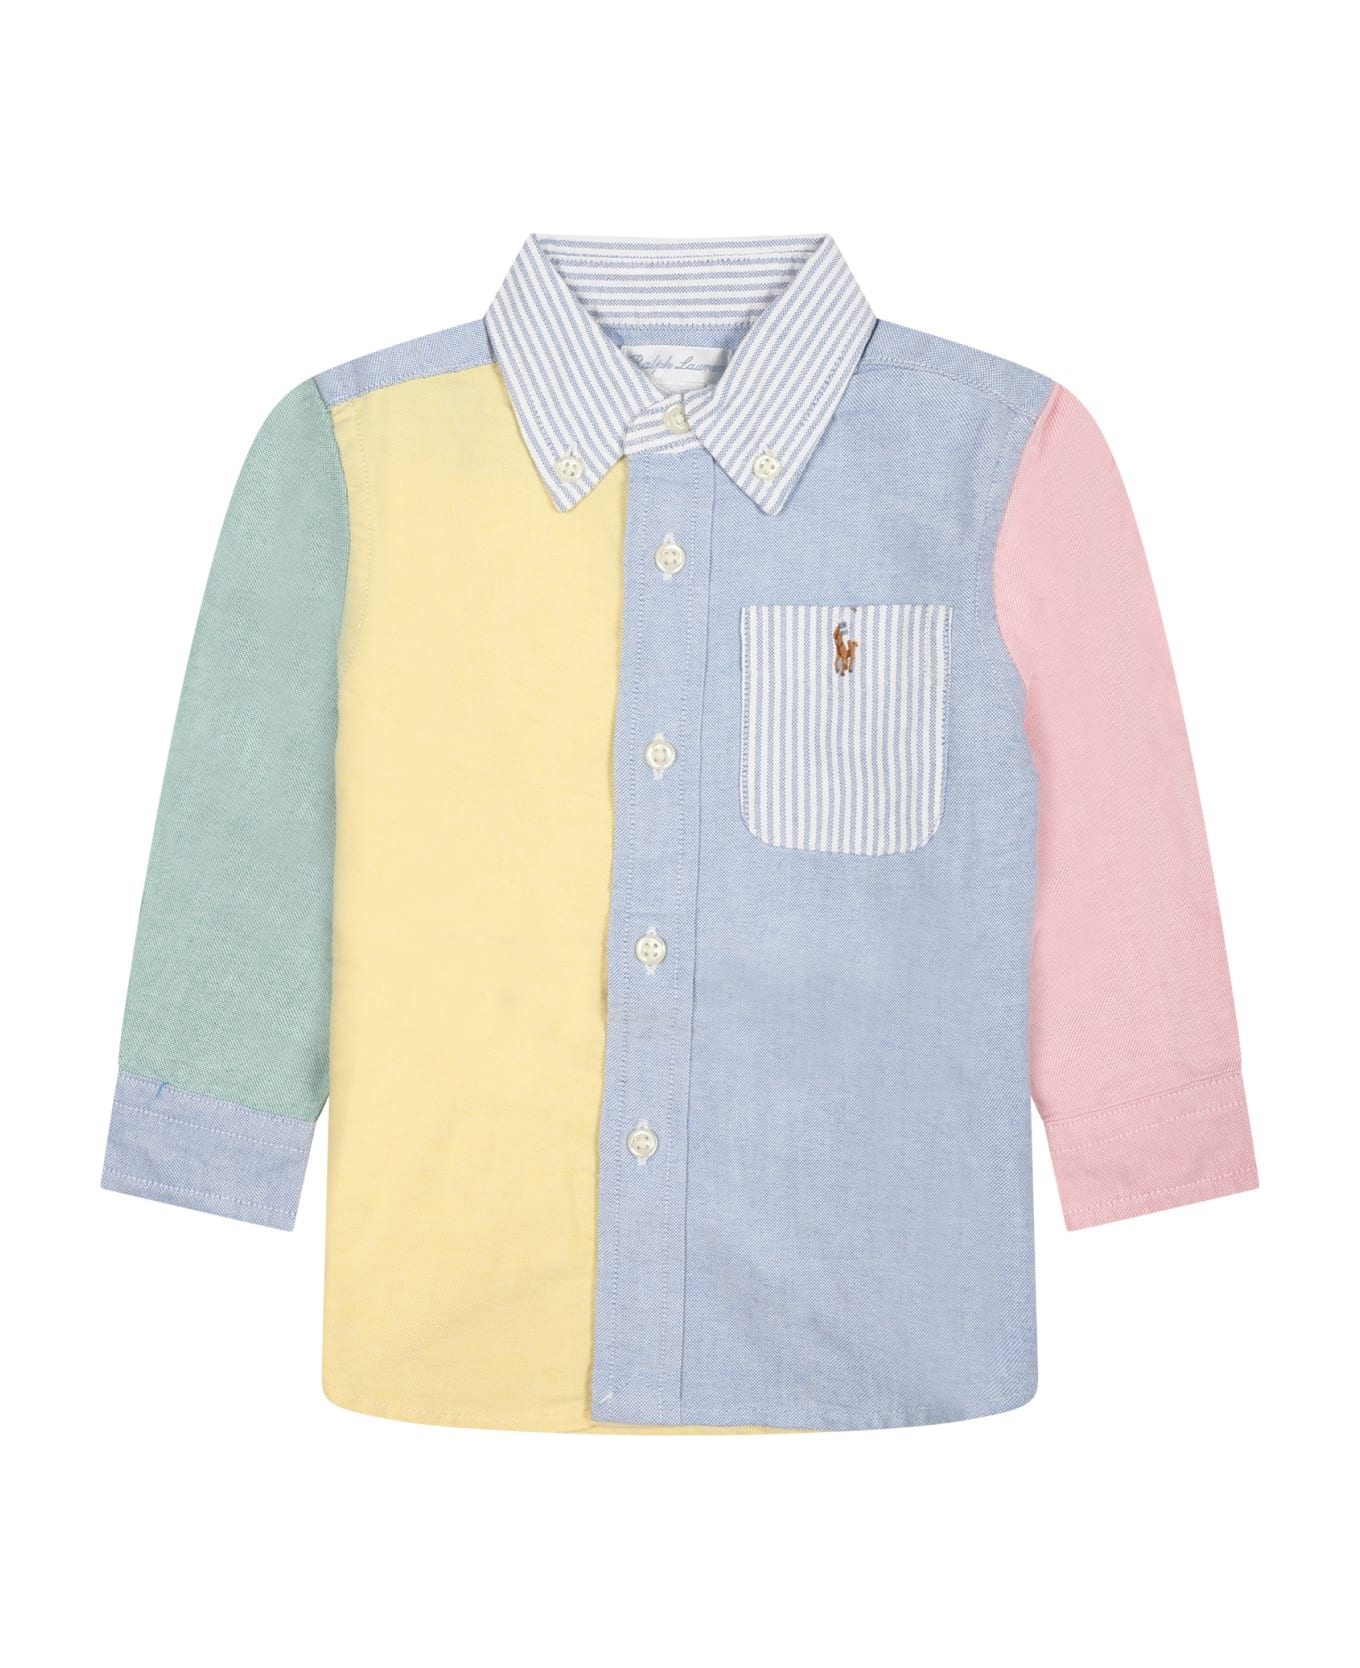 Ralph Lauren Multicolored Shirt For Babies With Logo - Multicolor